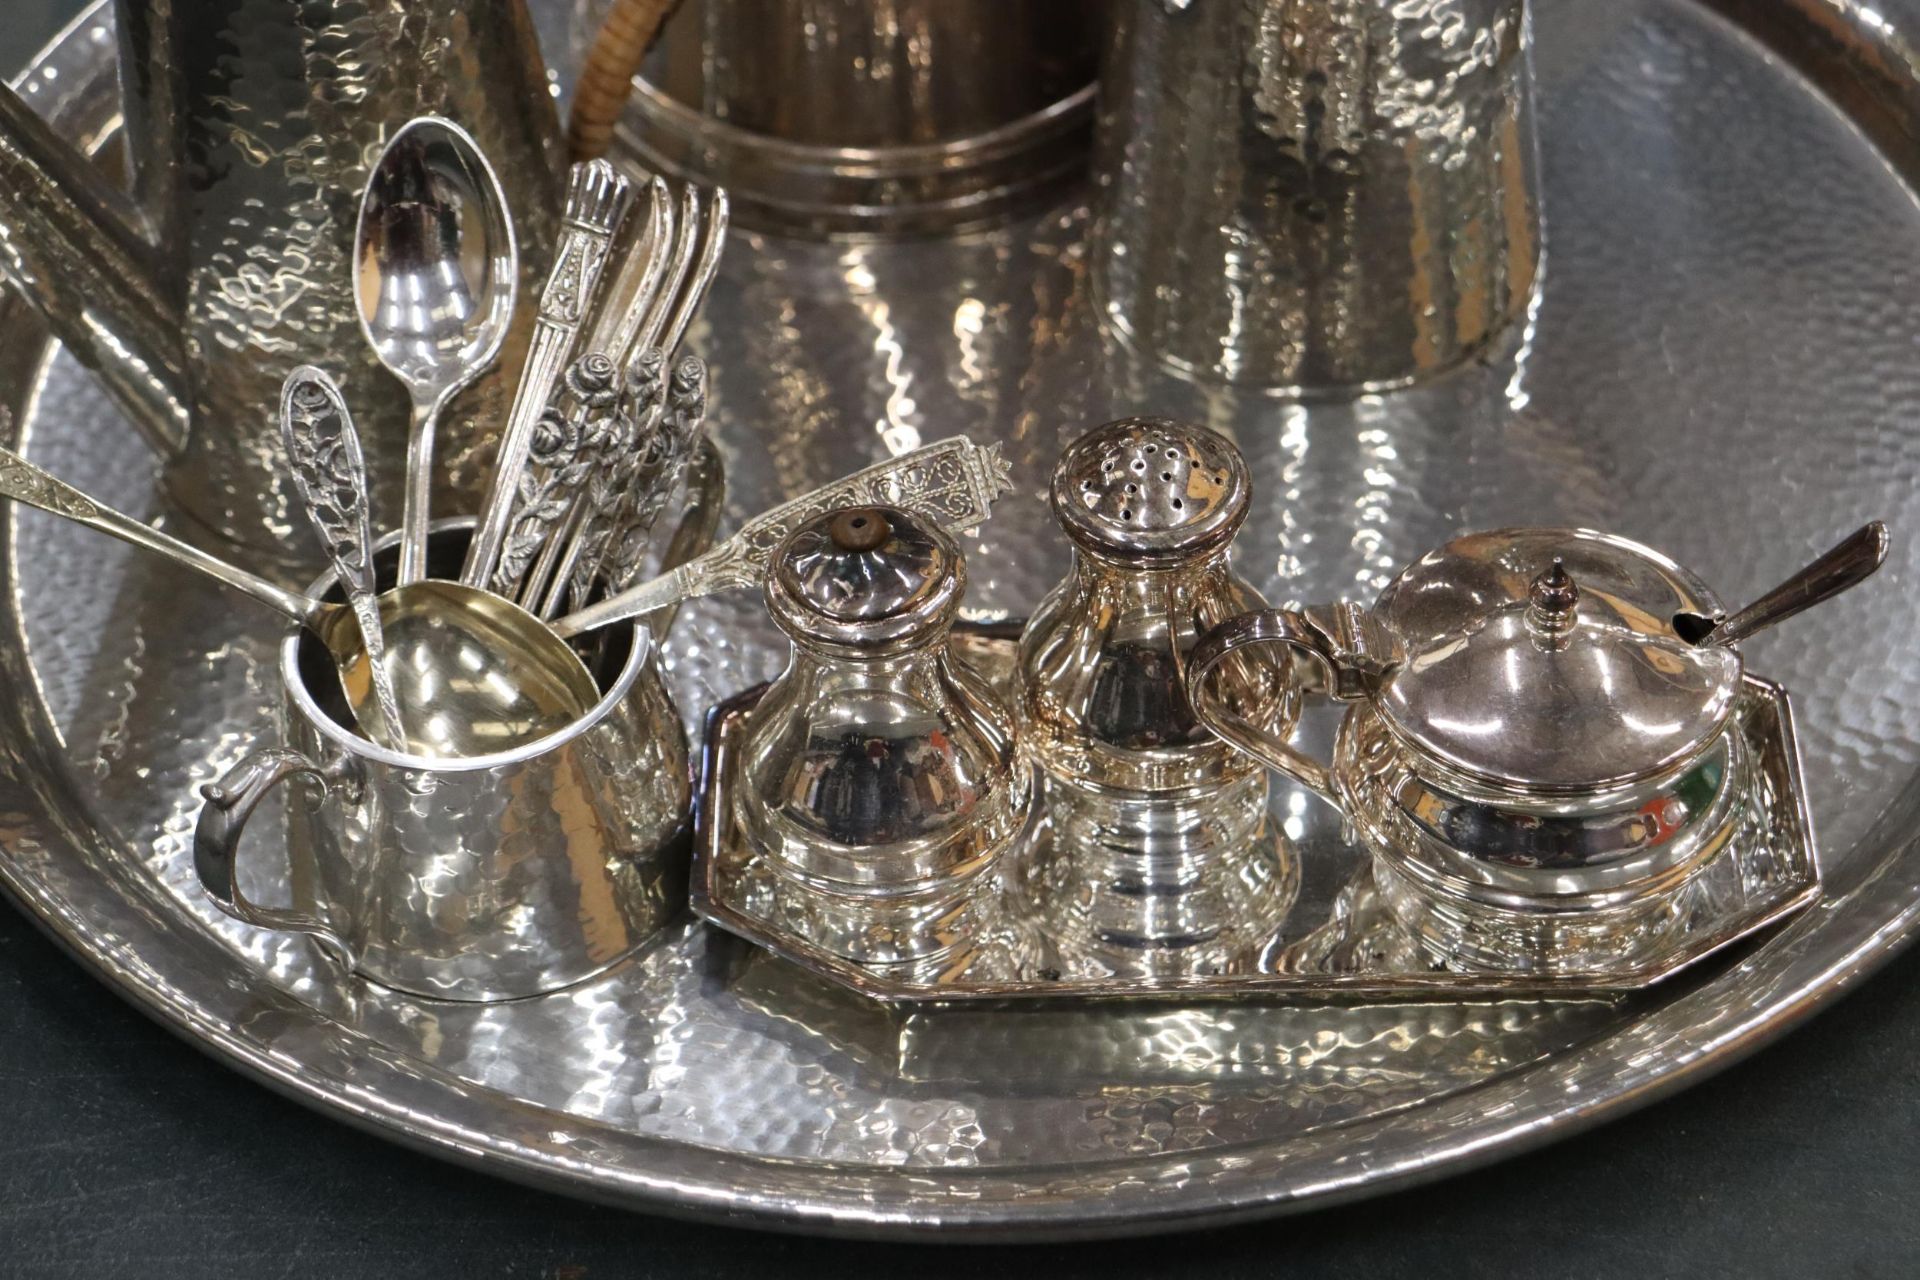 A PEWTER TRAY, COFFEE POT AND HOT WATER JUG, PLUS A SILVER PLATED COFFEE POT, CRUET SET, MUSTARD - Image 2 of 9